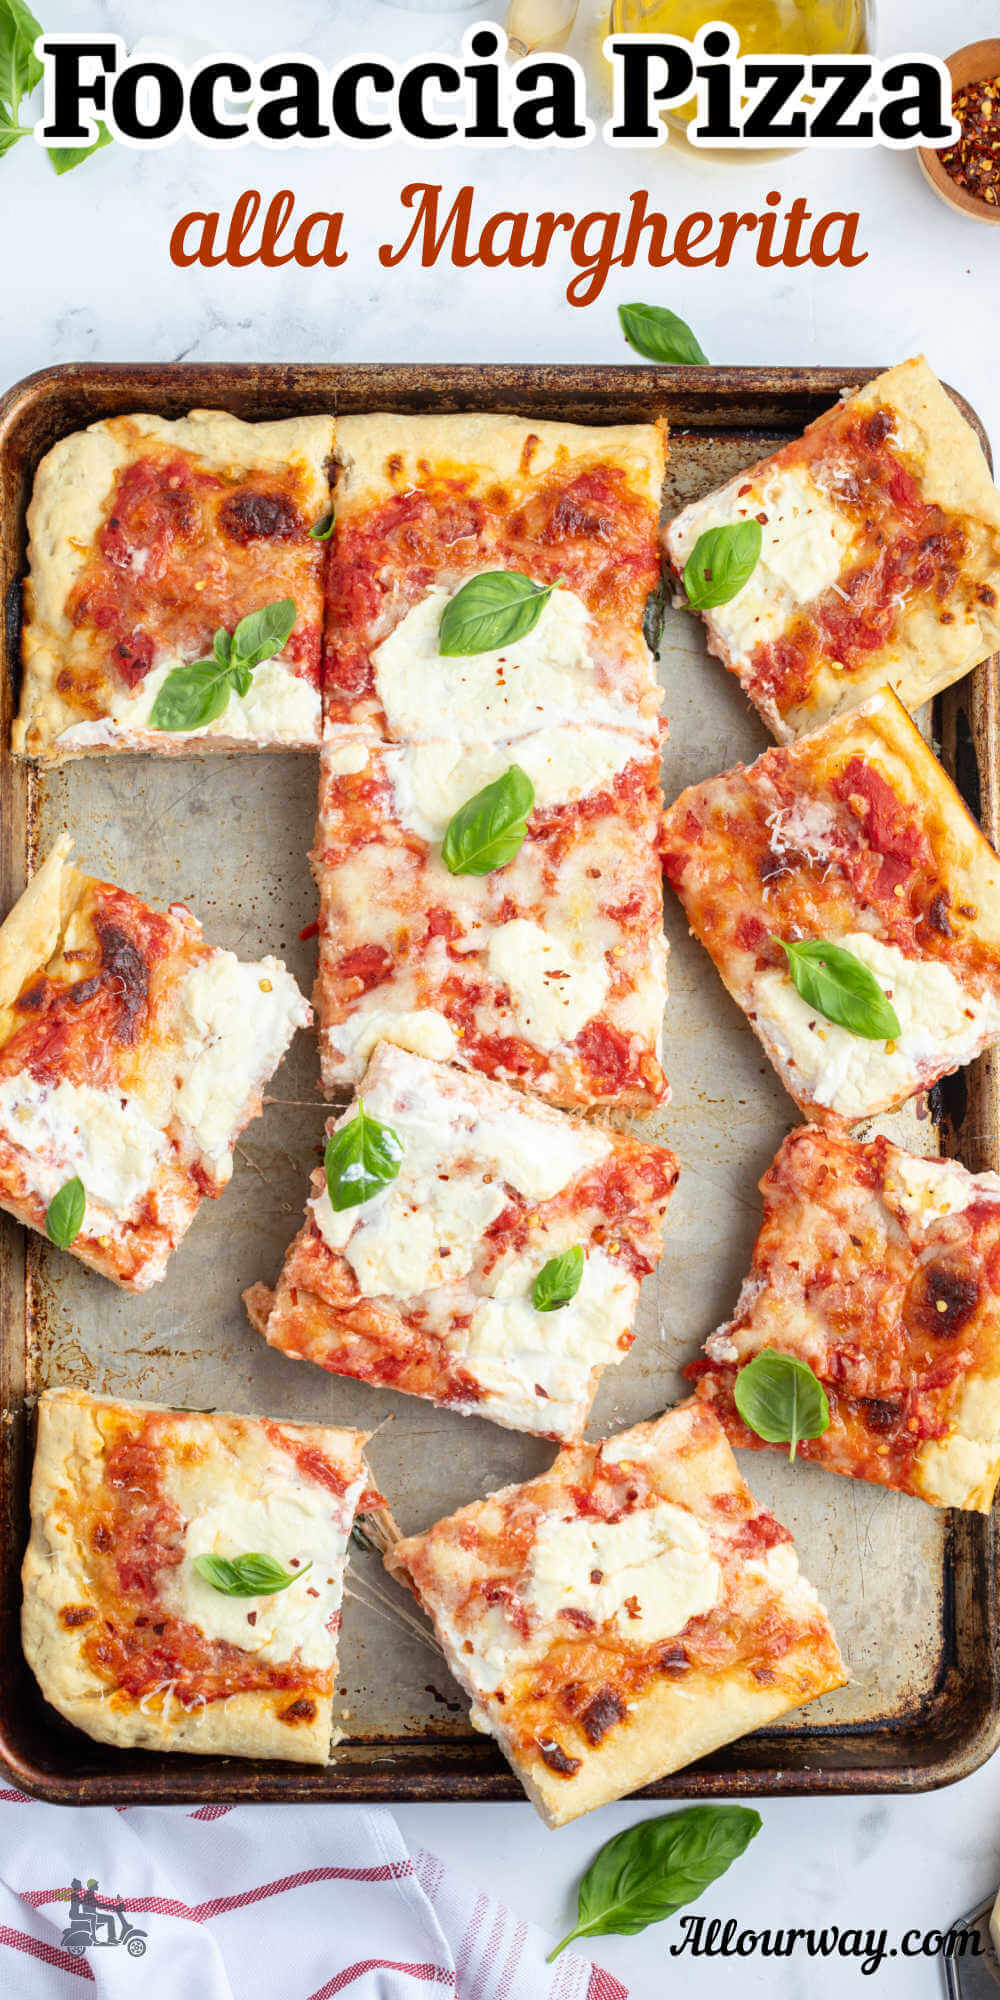 Pinterest image with title overlay of Focaccia Pizza alla Margherita.